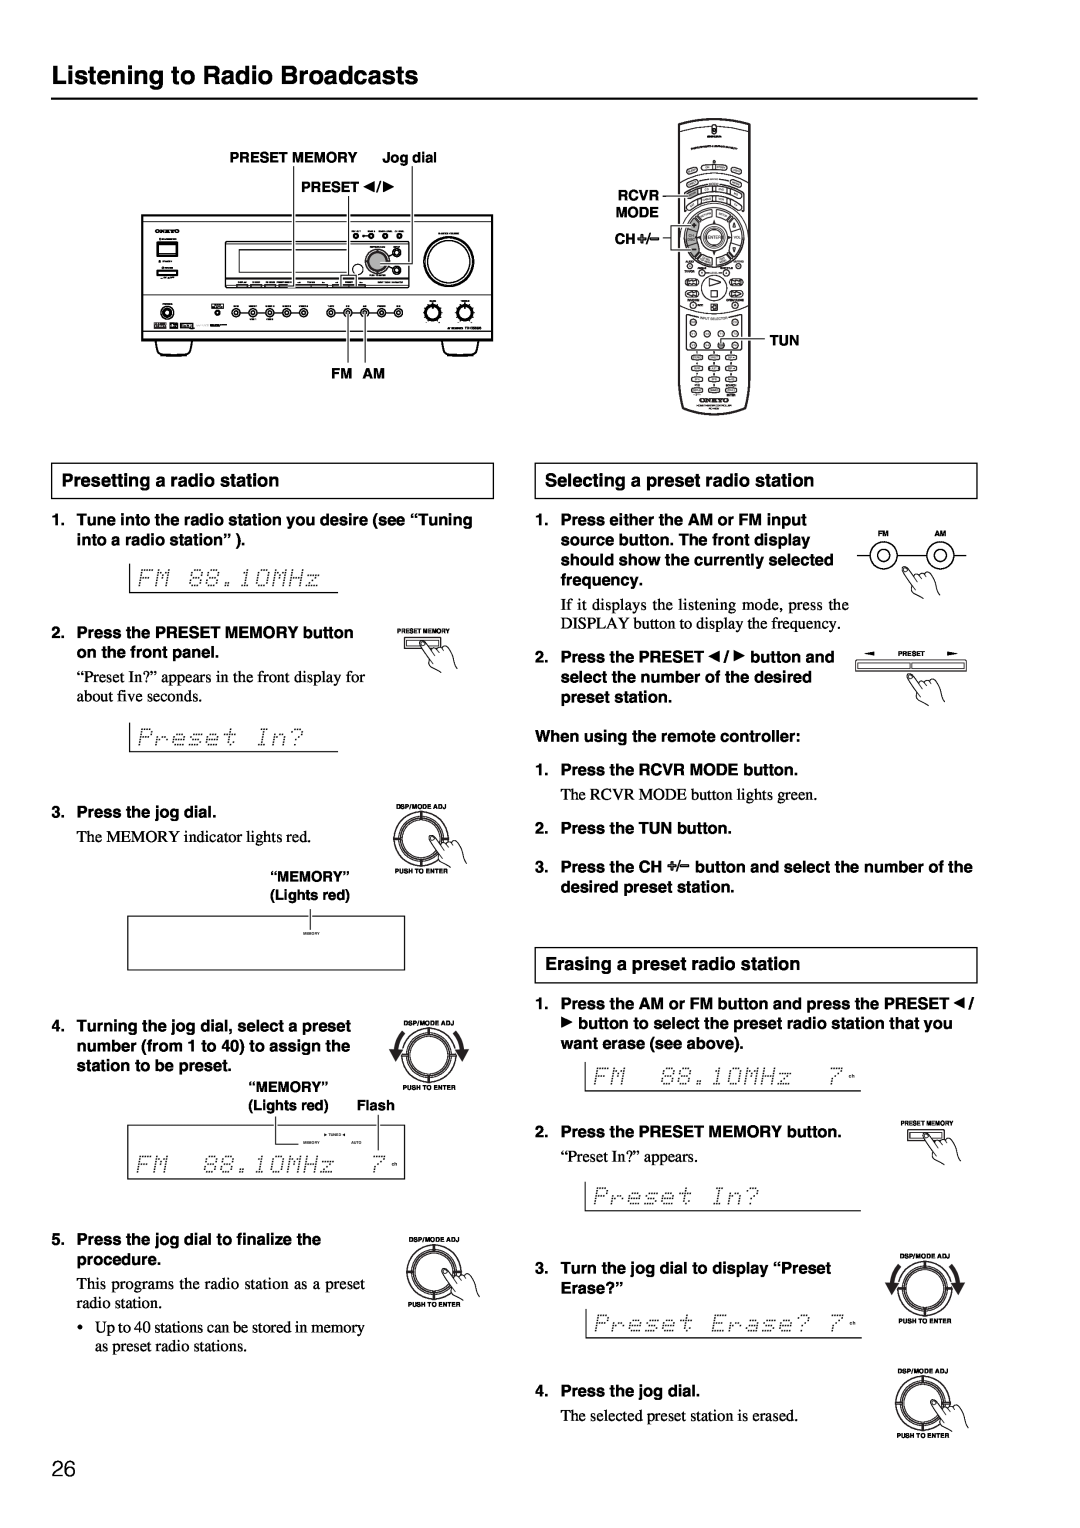 Onkyo TX-DS696 appendix Listening to Radio Broadcasts, Presetting a radio station, Selecting a preset radio station 